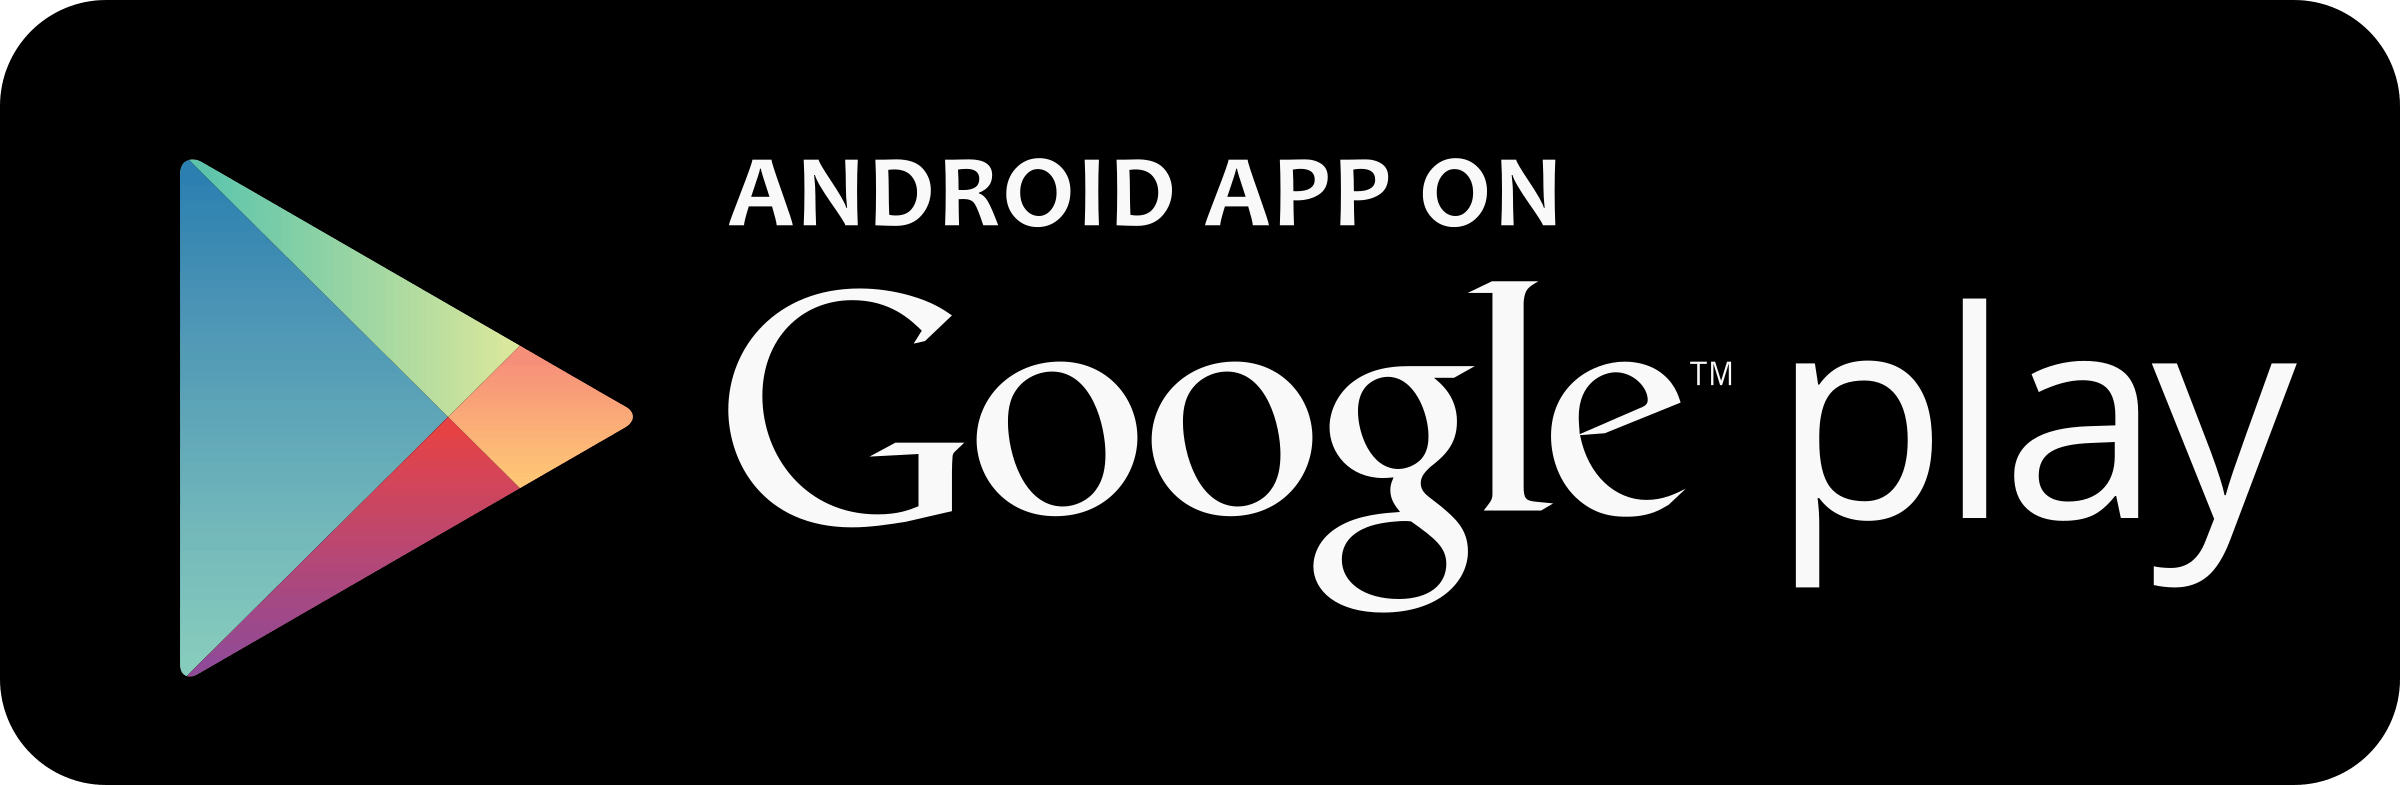 Android- App Logo - Google Play download Android app Logo PNG Transparent & SVG Vector ...